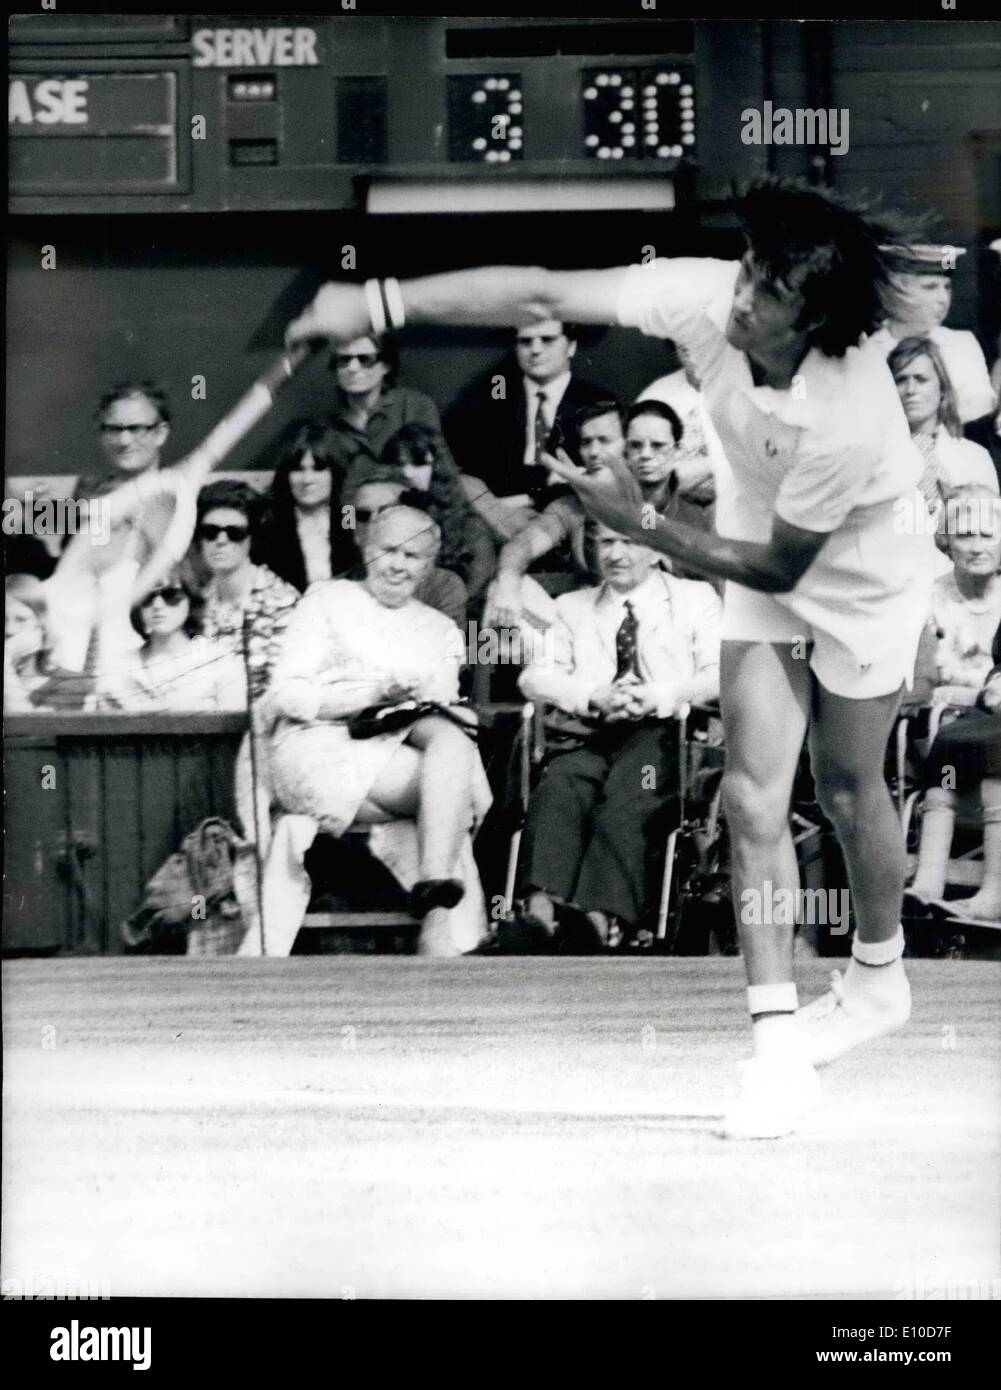 Ilie nastase 1972 hi-res stock photography and images - Alamy